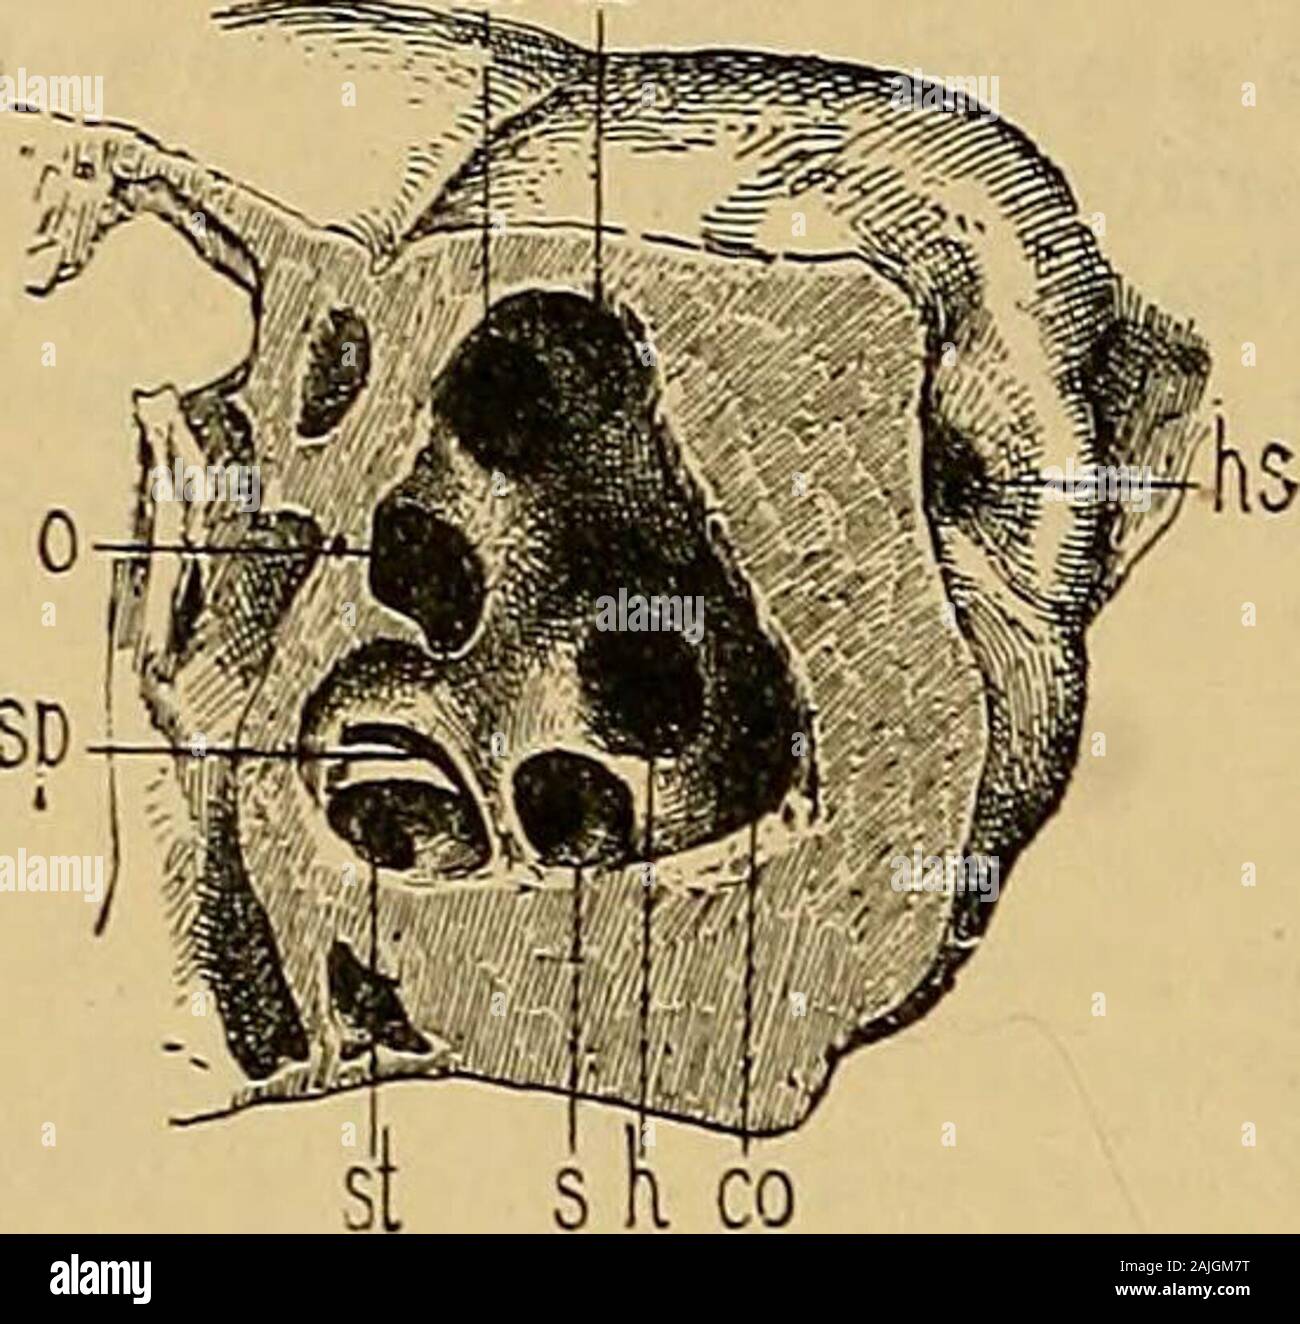 A text-book of the diseases of the ear for students and practitioners . preparationsthe cavity of the cochlea communicates with the vestibule by a spaciousopening (Fig. 303, v), and with the tympanic cavity by means of the roundwindow. With its spiral windings, the cochlea is so embedded in the petrous portionof the temporal bone between the internal meatus and the carotid canal thatits base is turned inwards towards the internal auditory canal and its apex(cupola) outwards towards the tympanic cavity. On vertical sections of the cochlea (Fig. 307), one sees, in addition to theopenings of its Stock Photo